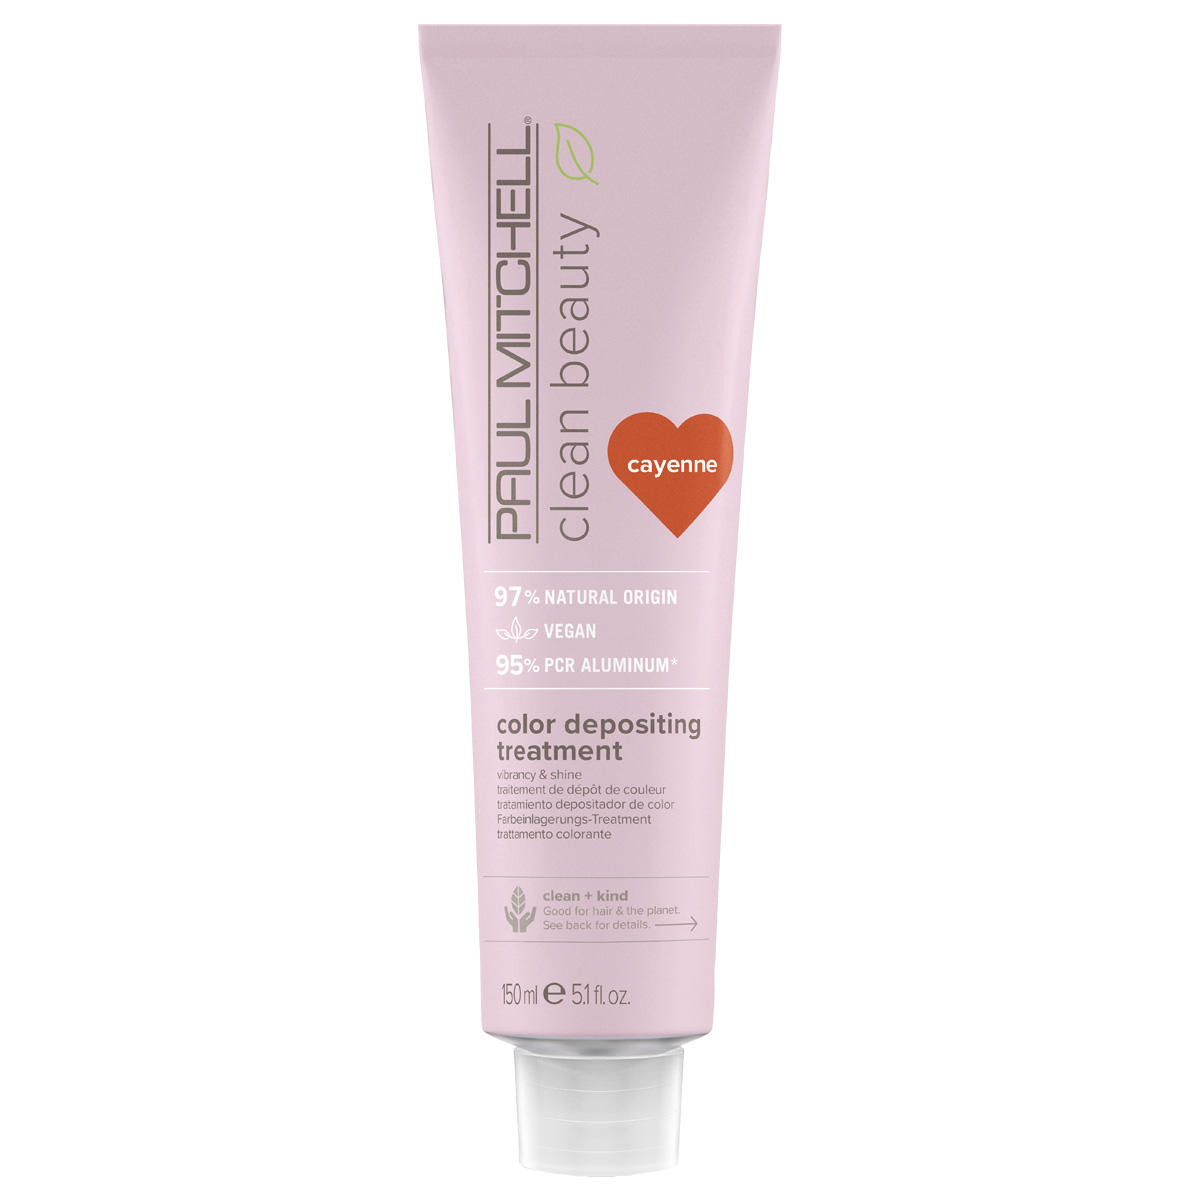 Paul Mitchell Clean Beauty Color Depositing Treatment  - 1